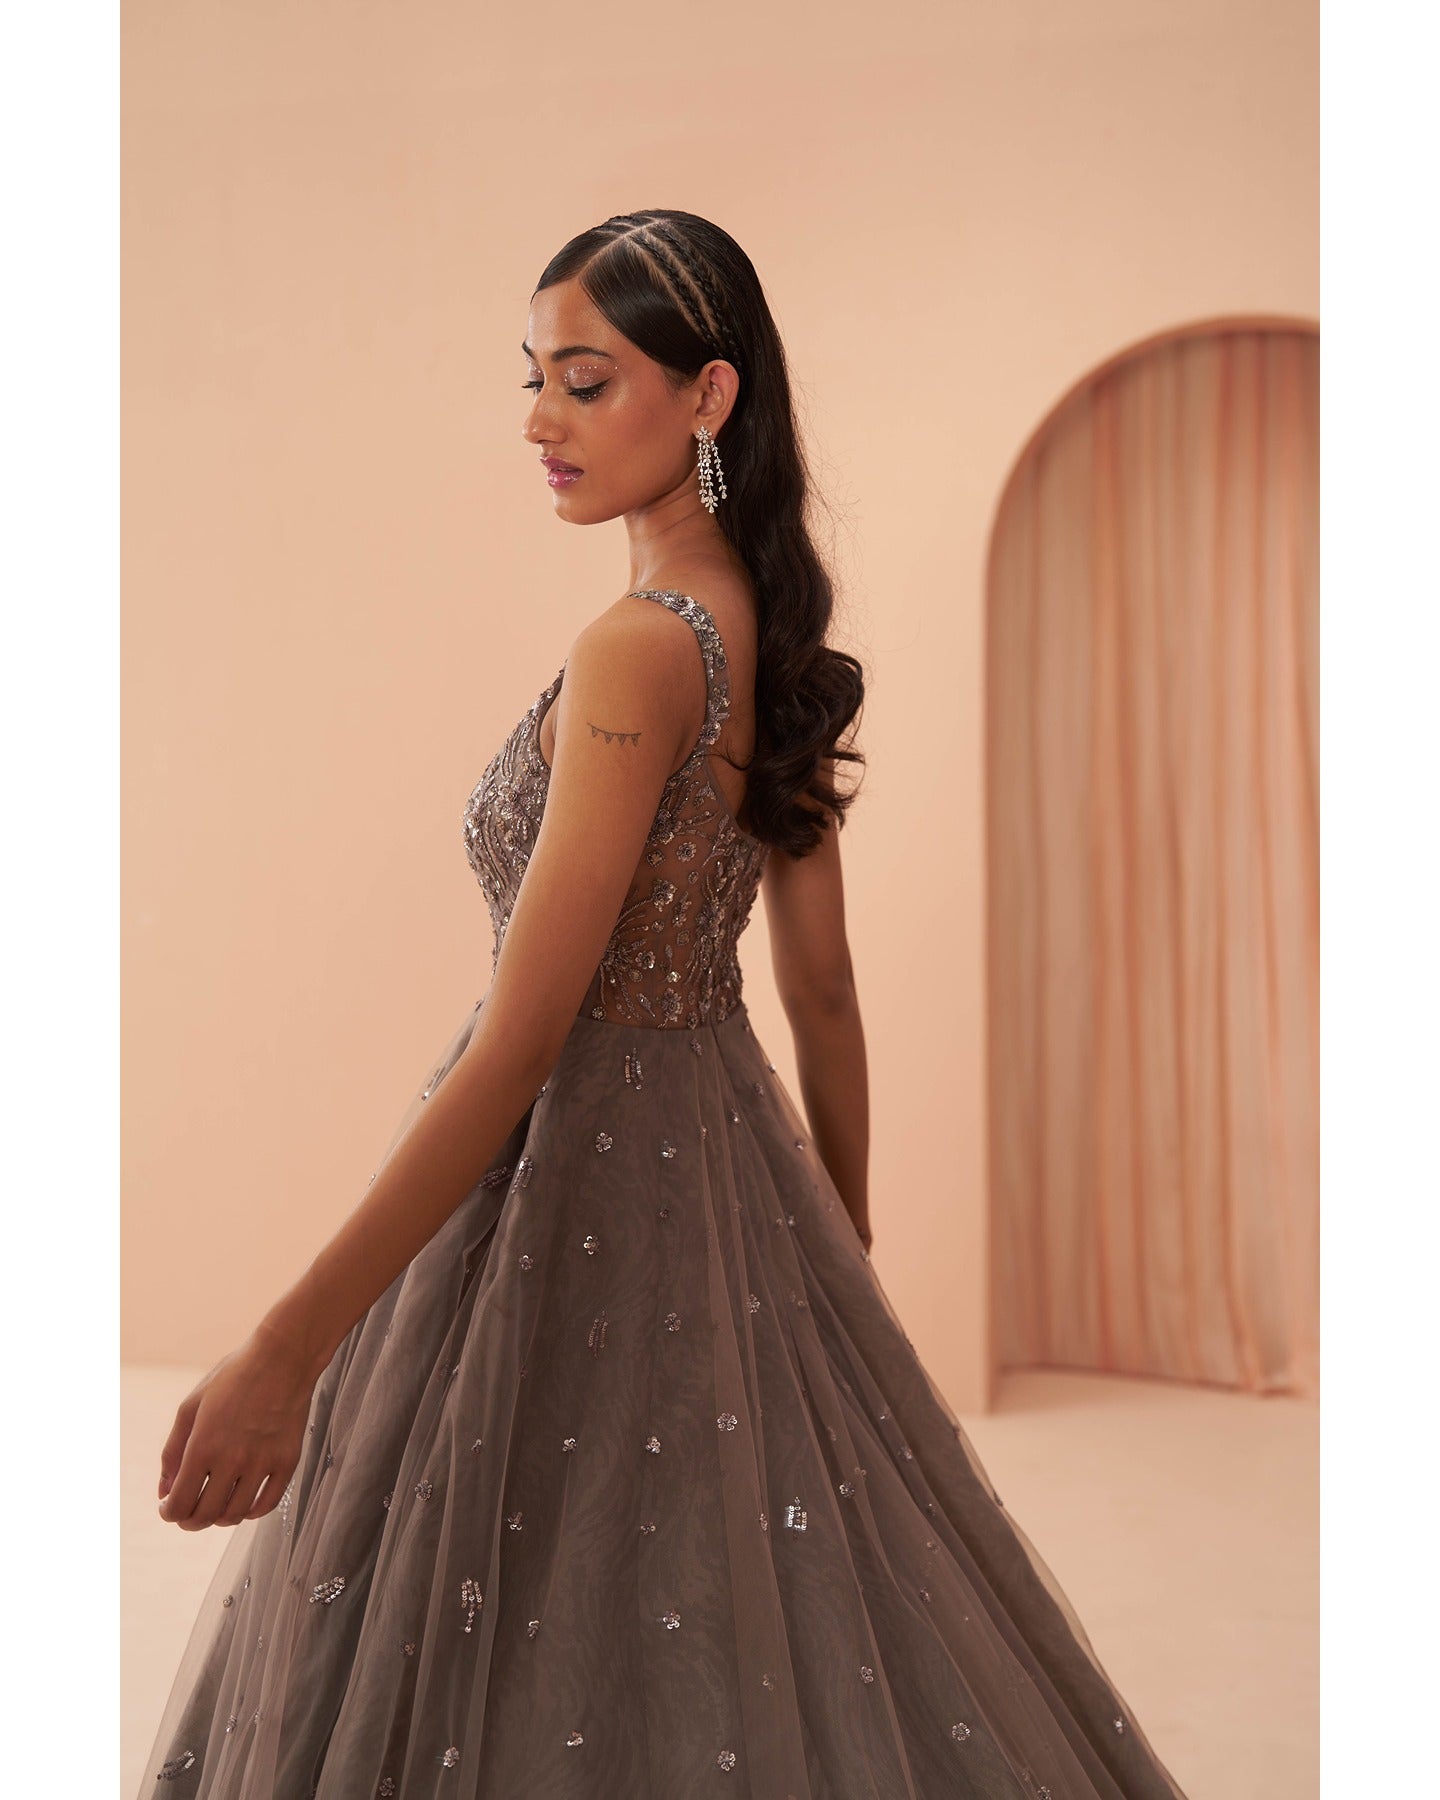 Grey Elegance: Hand-embroidered sophistication graces this gown, a vision of timeless charm.